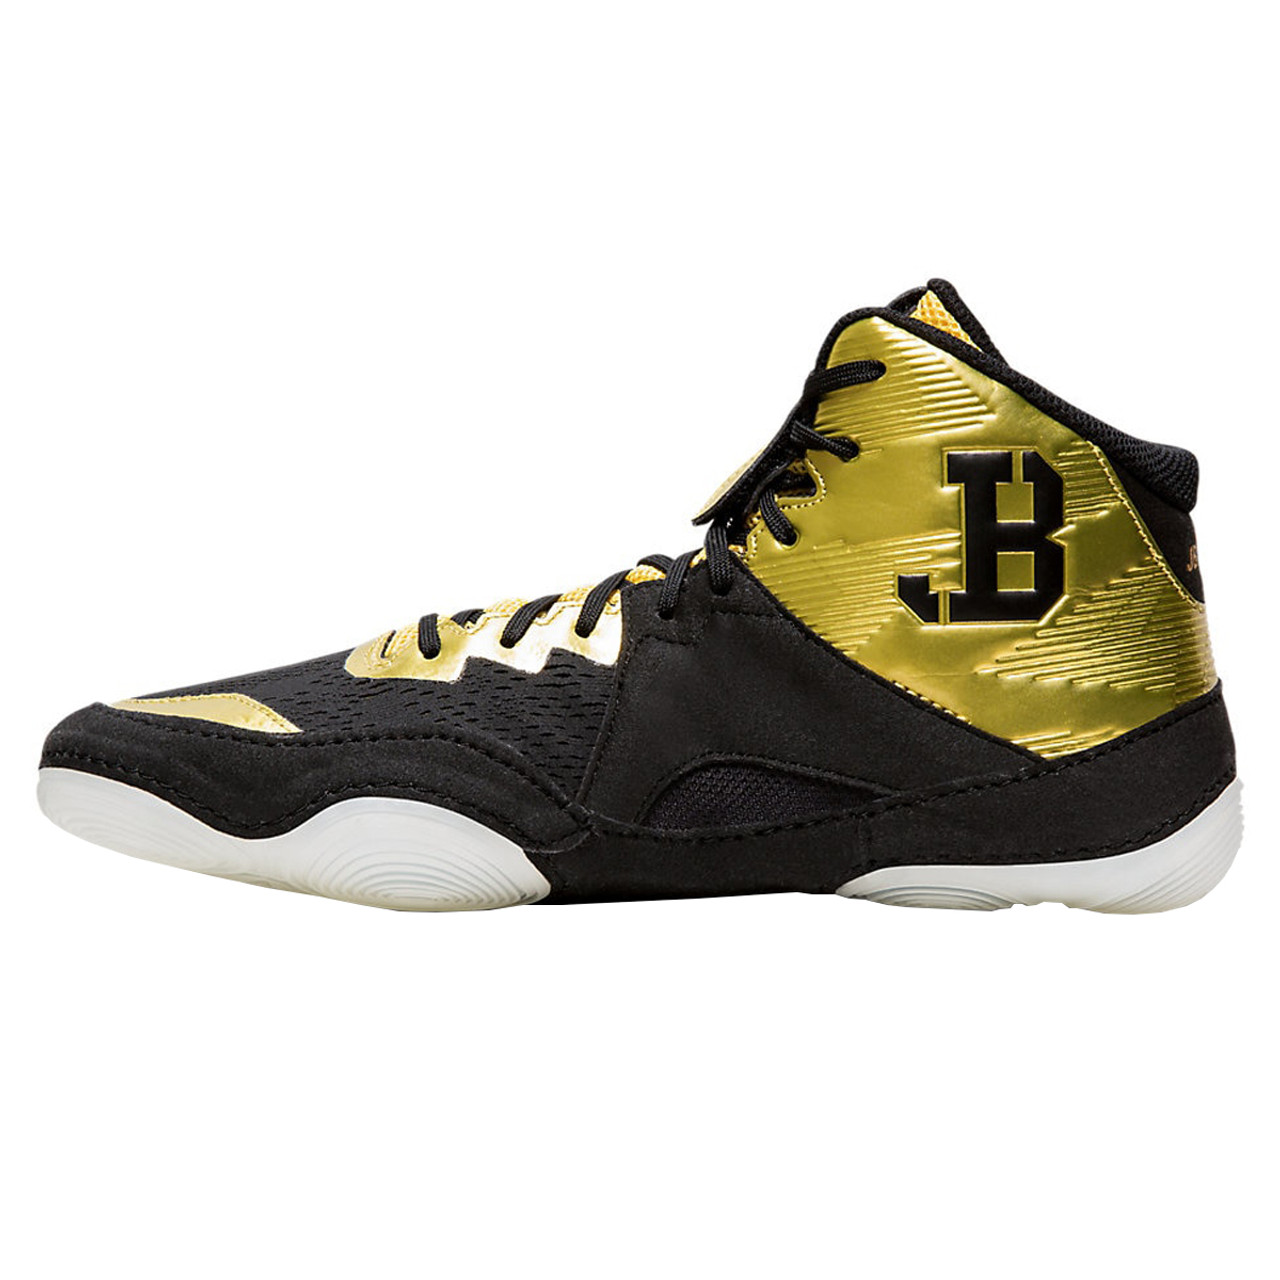 black and yellow asics wrestling shoes